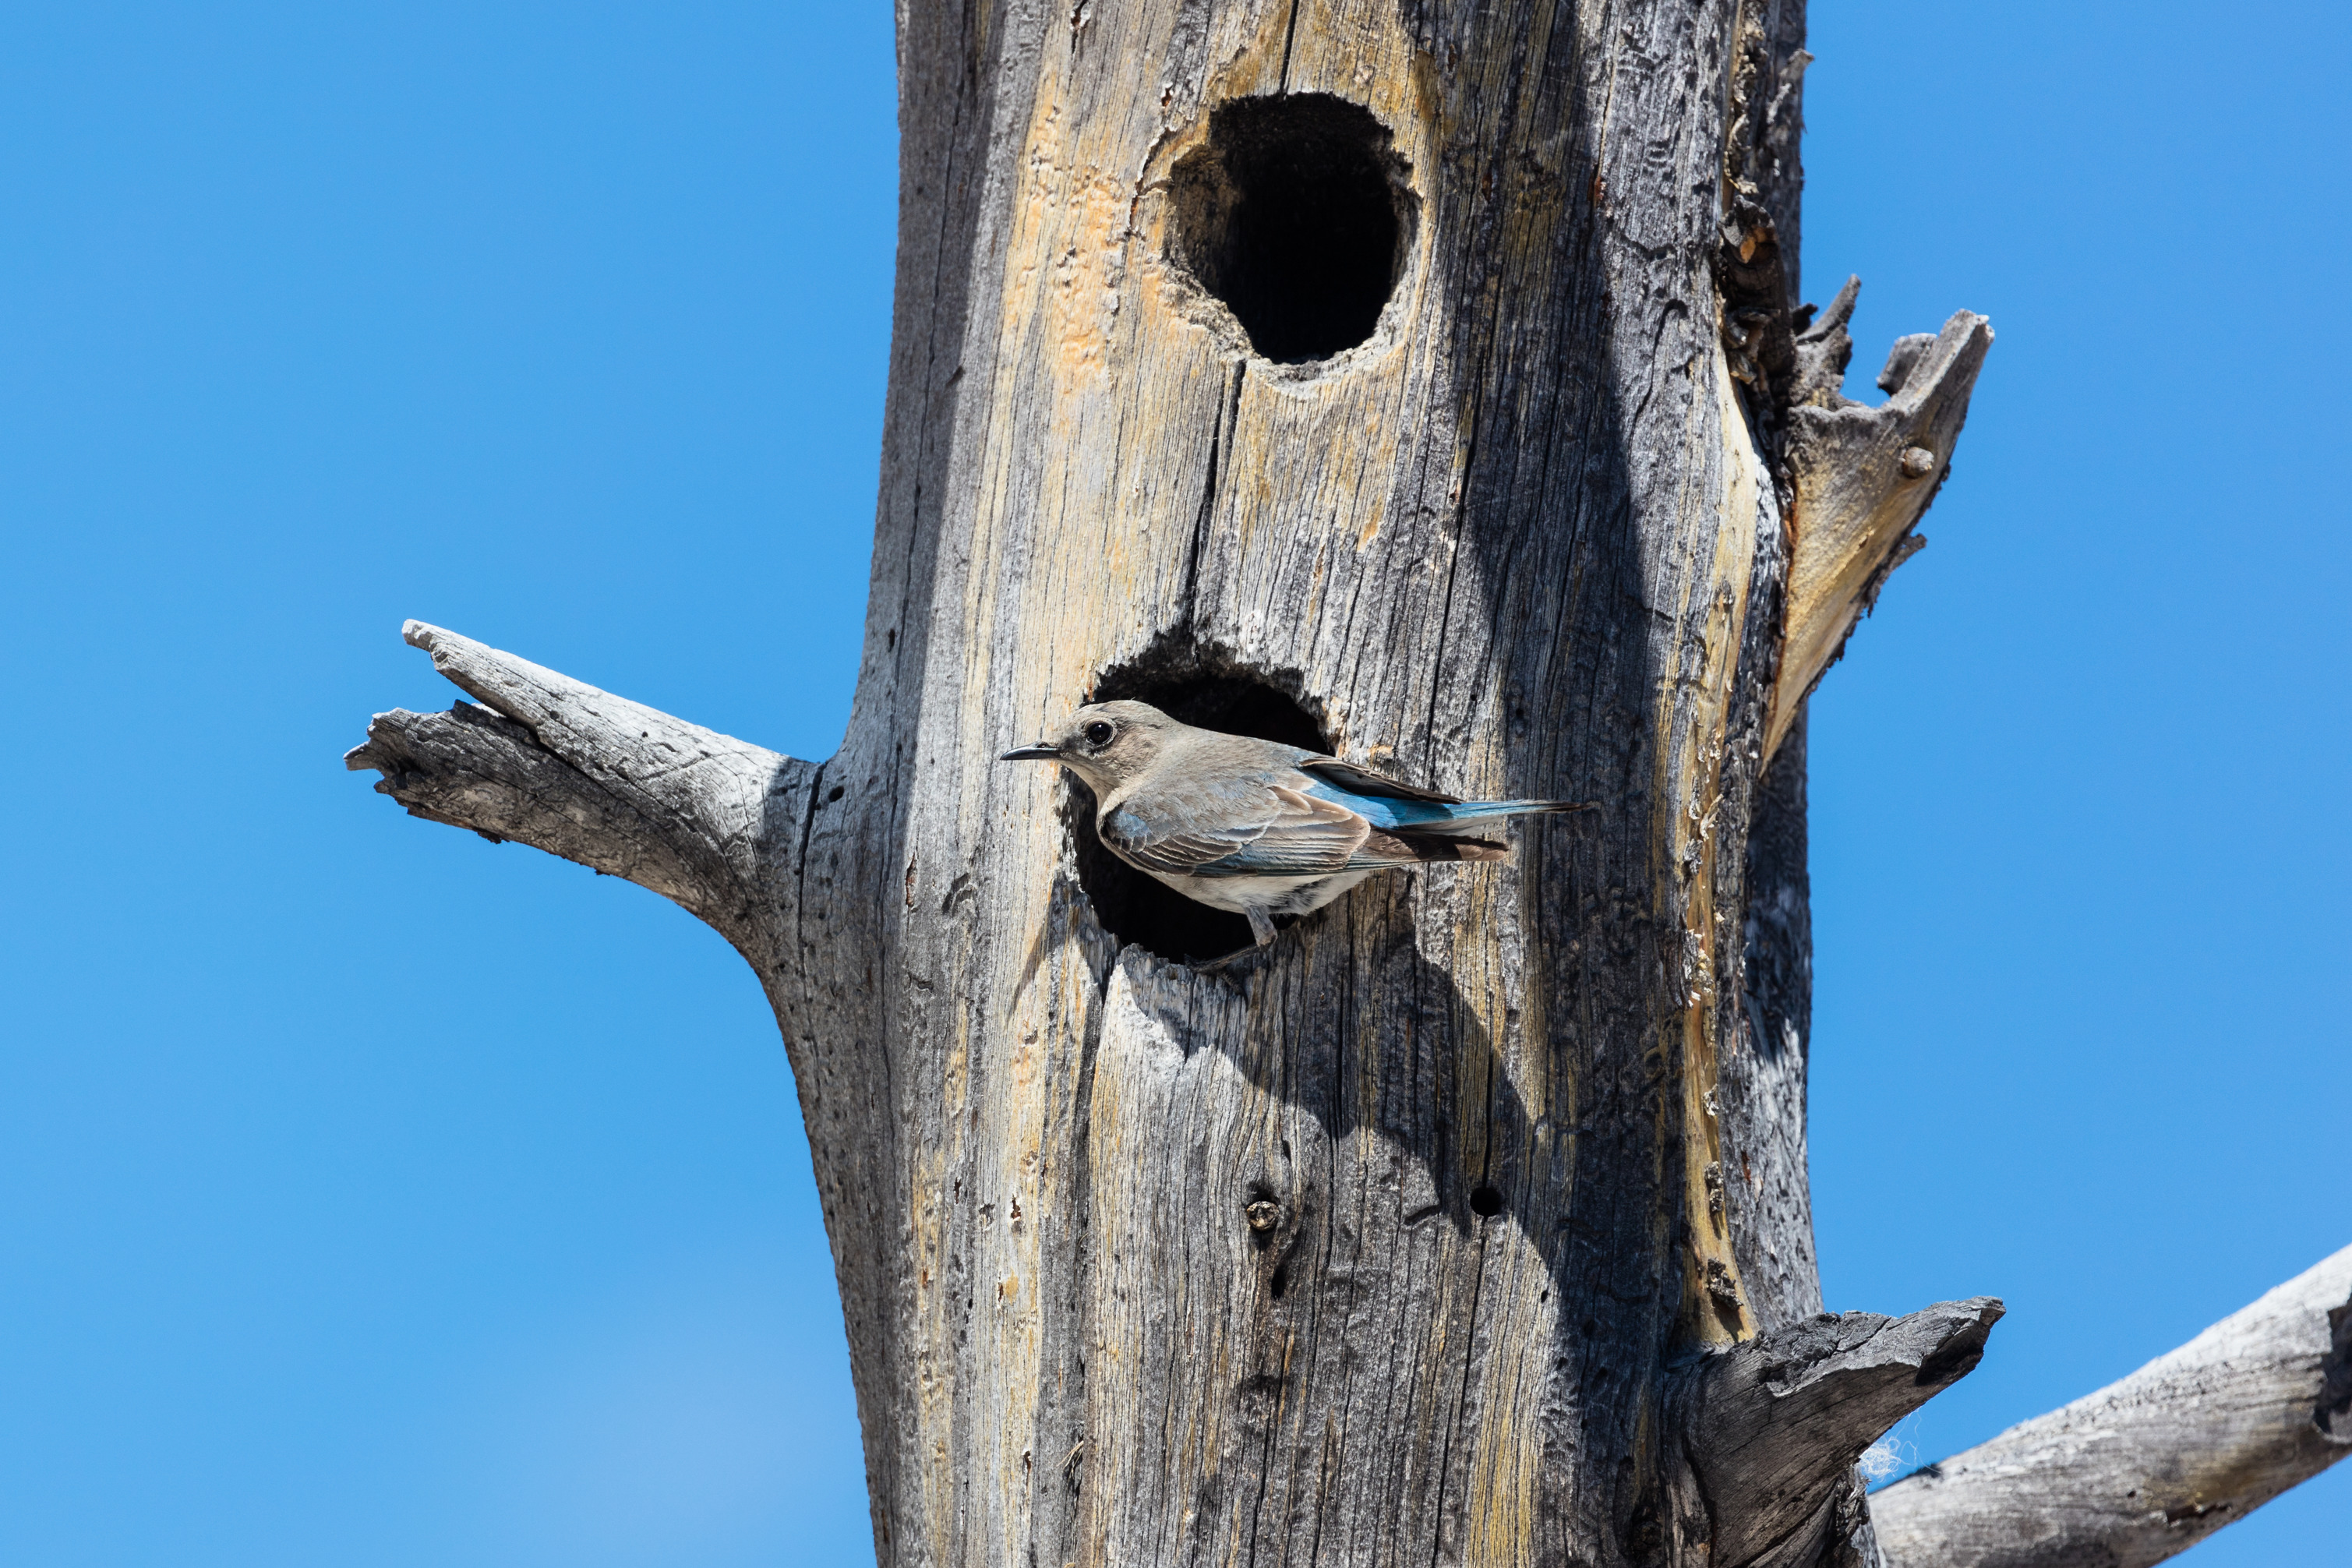 Female mountain bluebird perches at the opening of a nesting cavity in a dead tree.